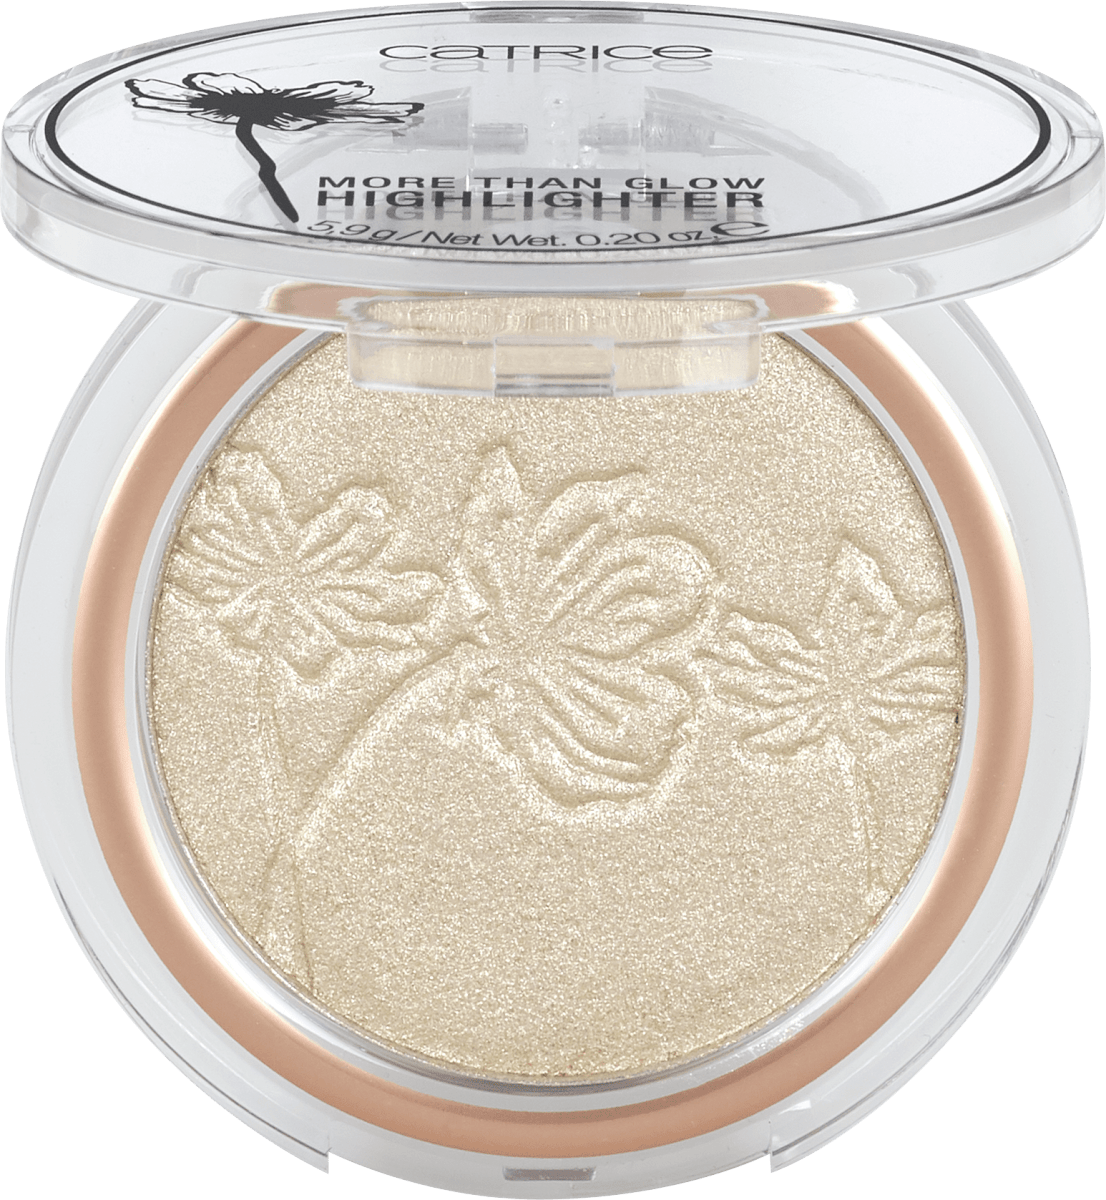 Than Catrice Ultimate g More Platinum 5,9 010 Glow Glaze, Highlighter